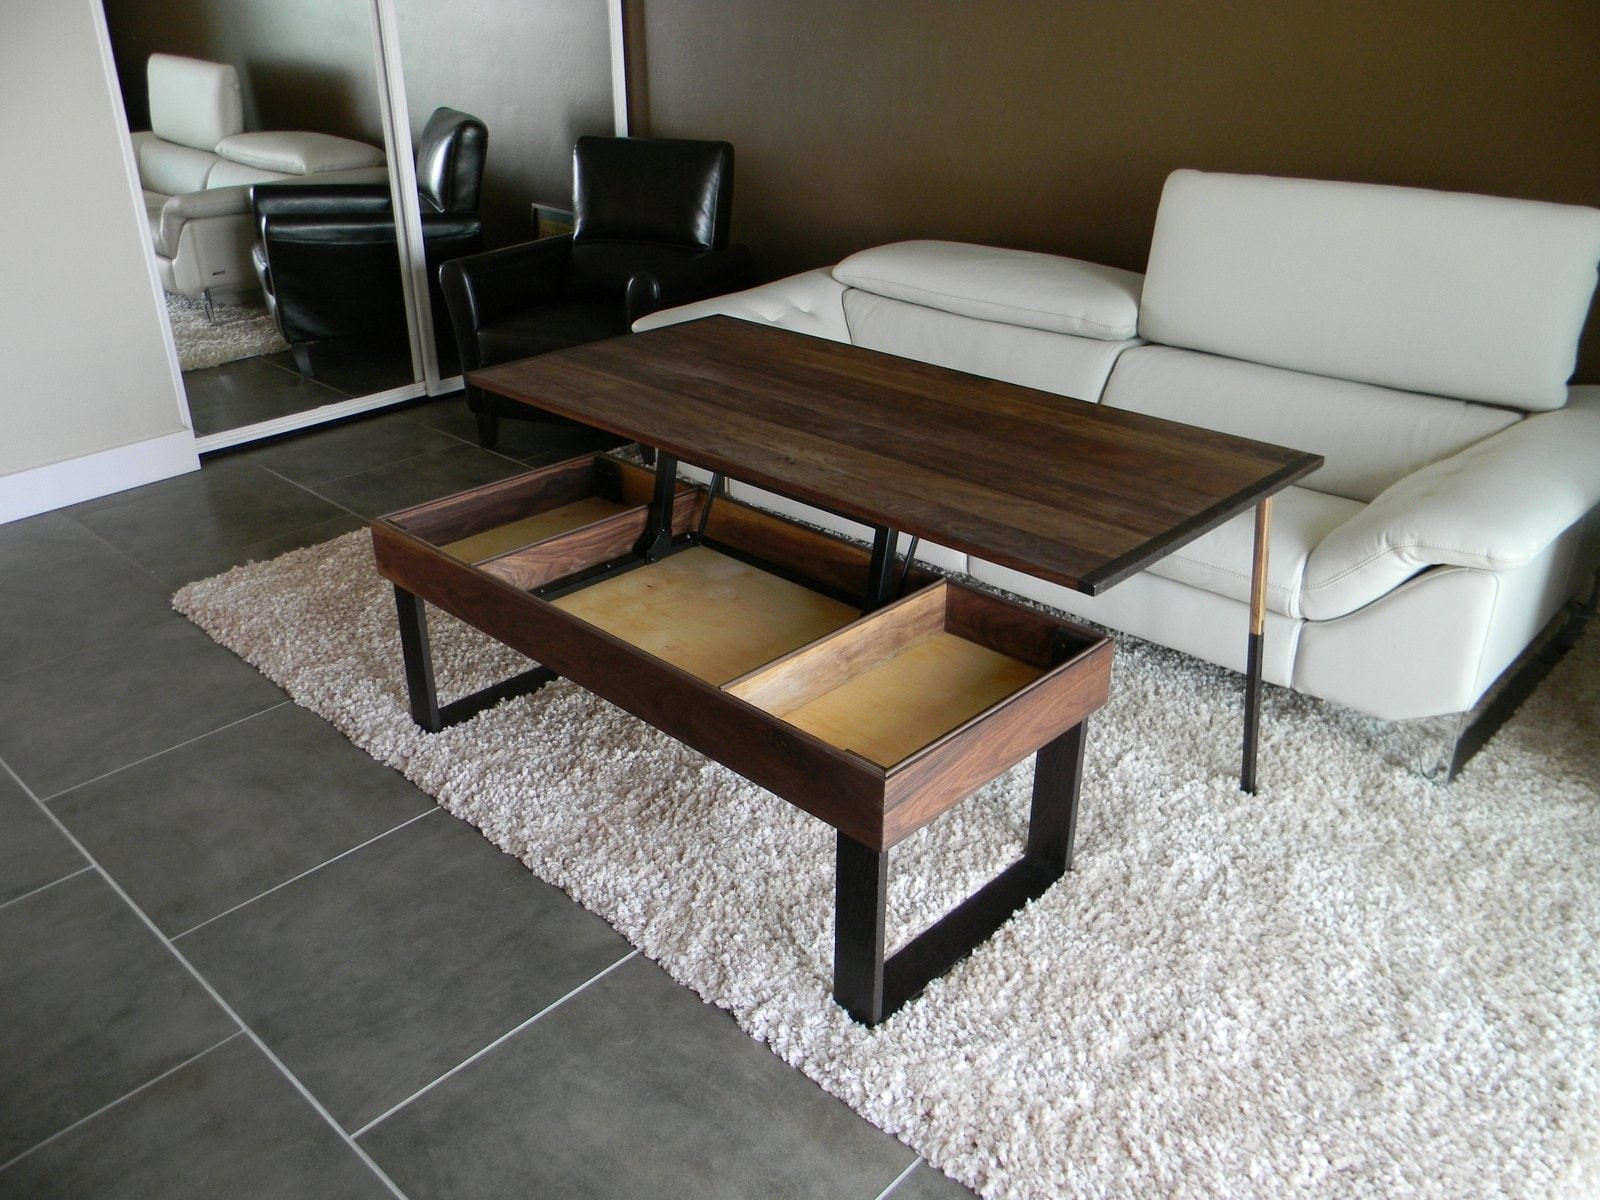 DIY Lift Top Coffee Table Plans
 Making Lift Top Coffee Tables – Loccie Better Homes